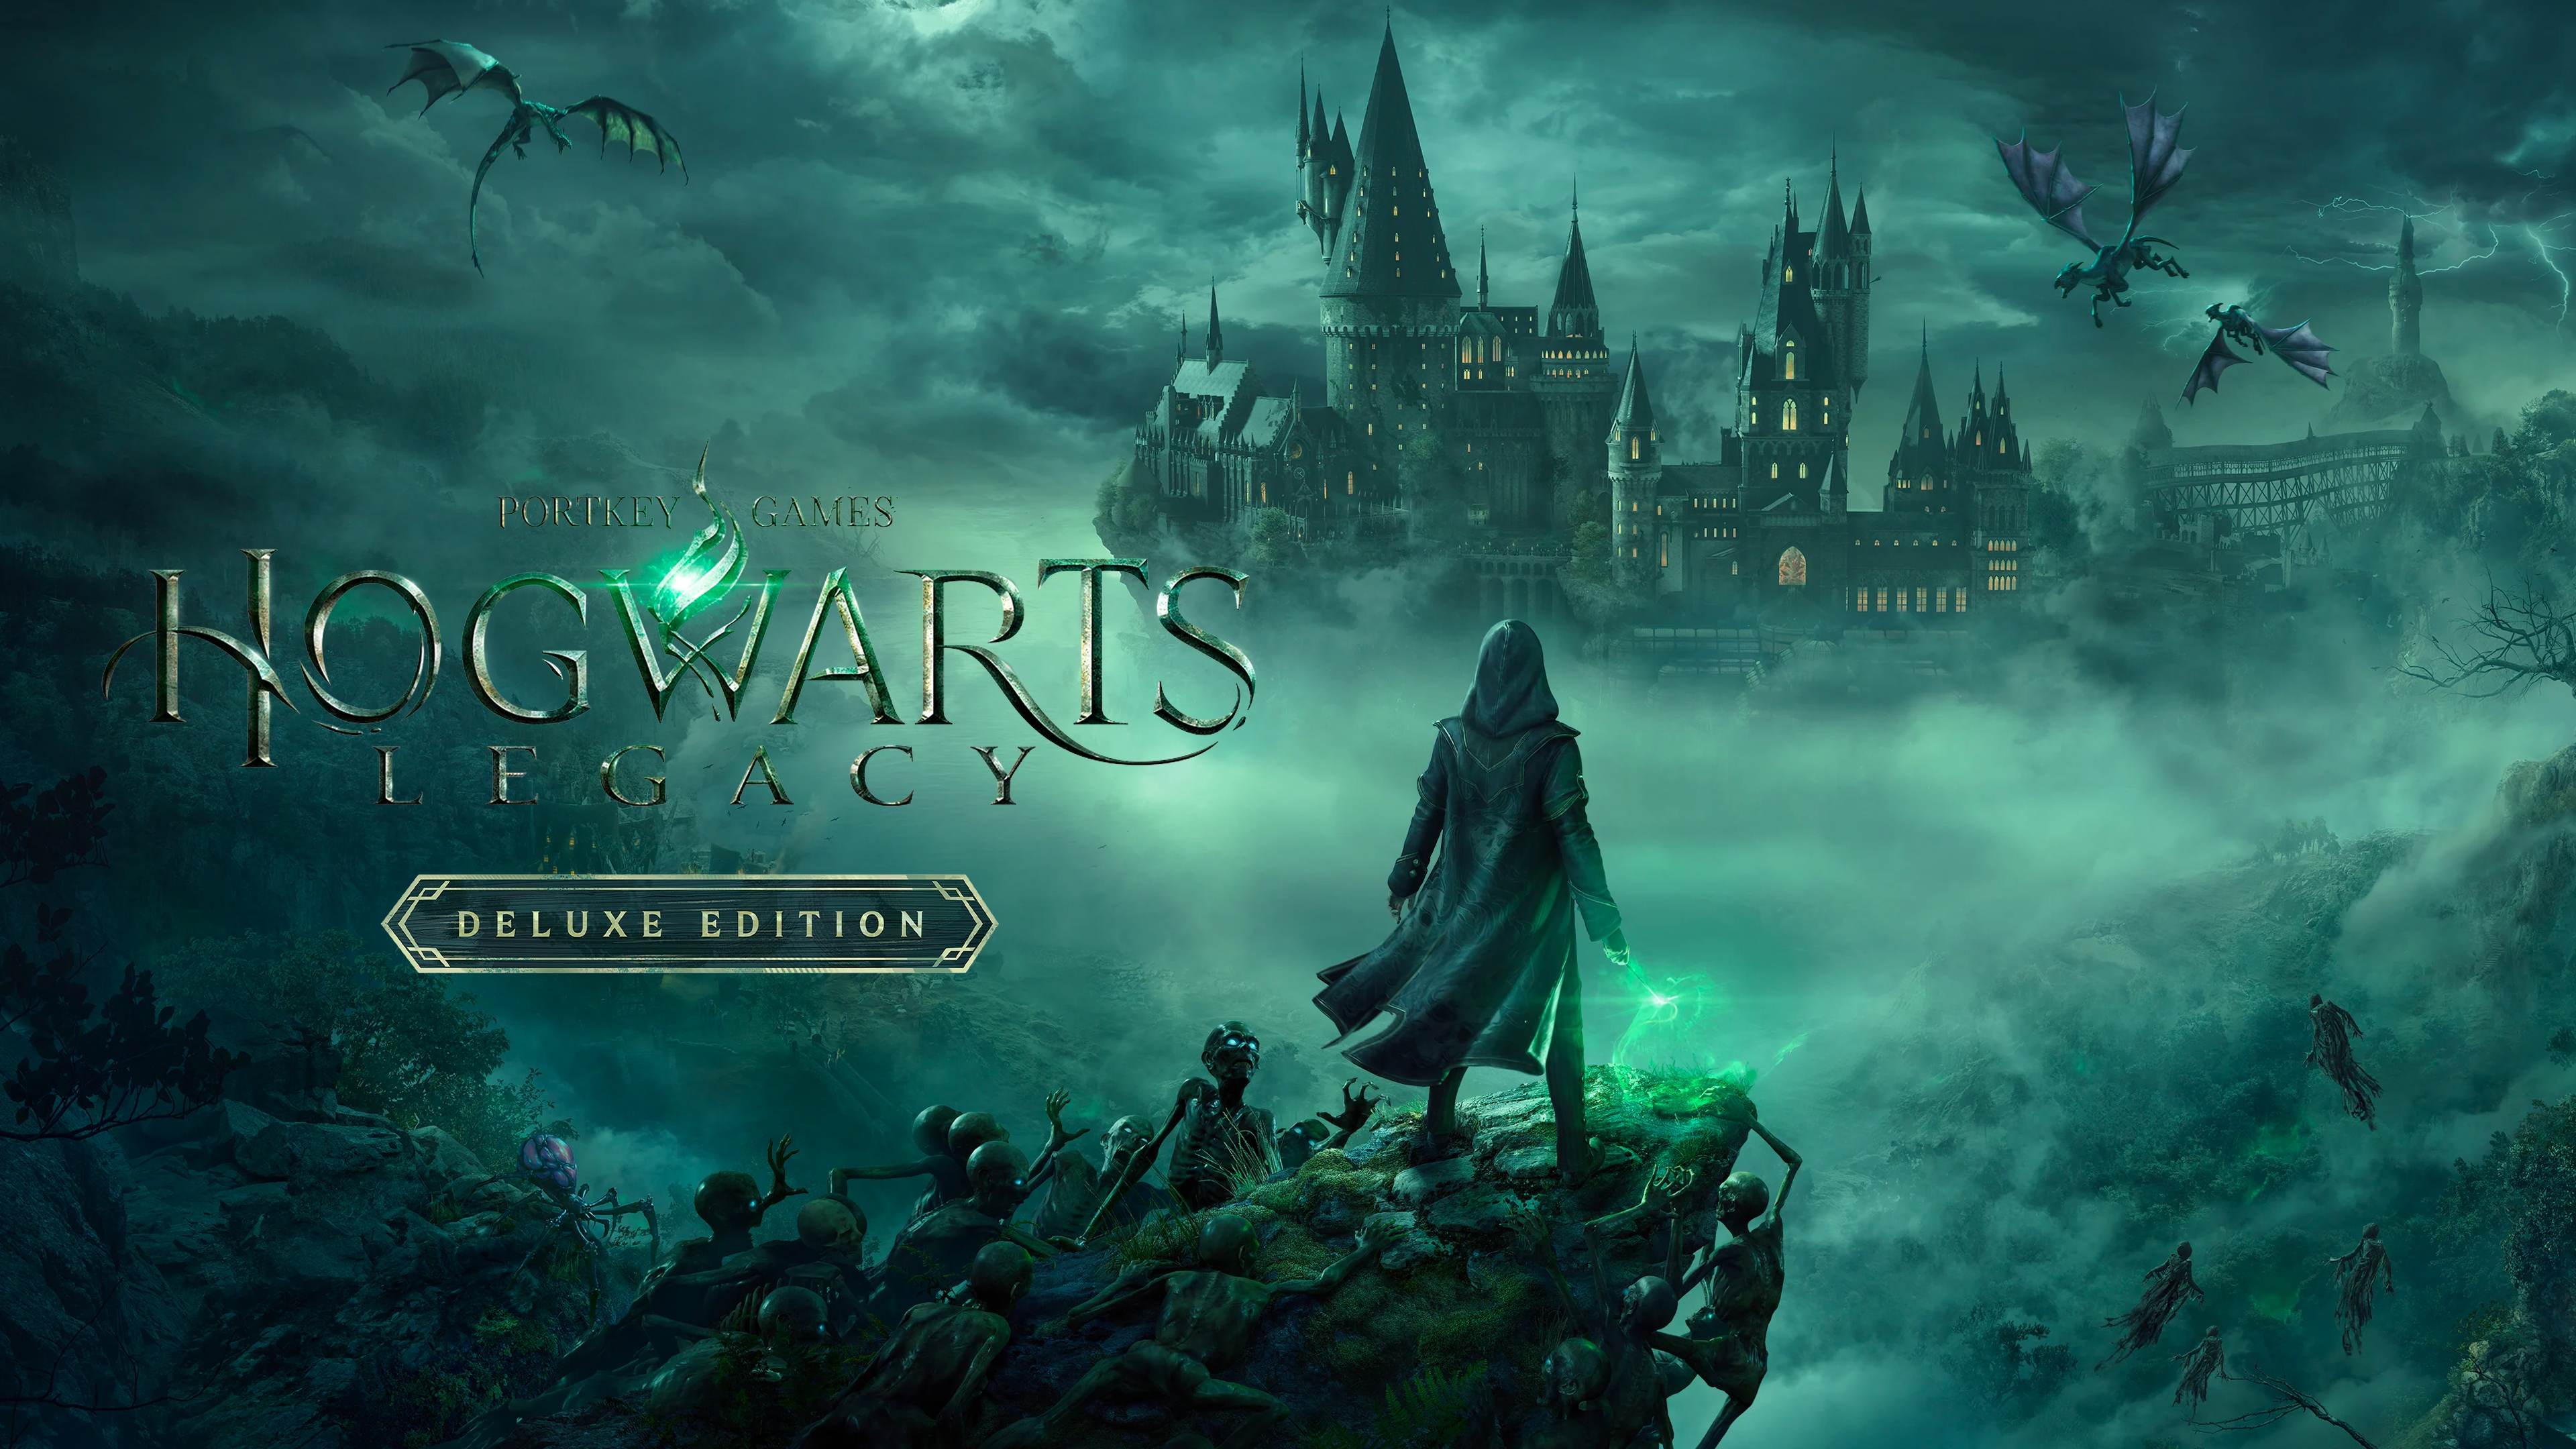 Xbox series S Hogwarts Legacy: Shop the  Spring Sale